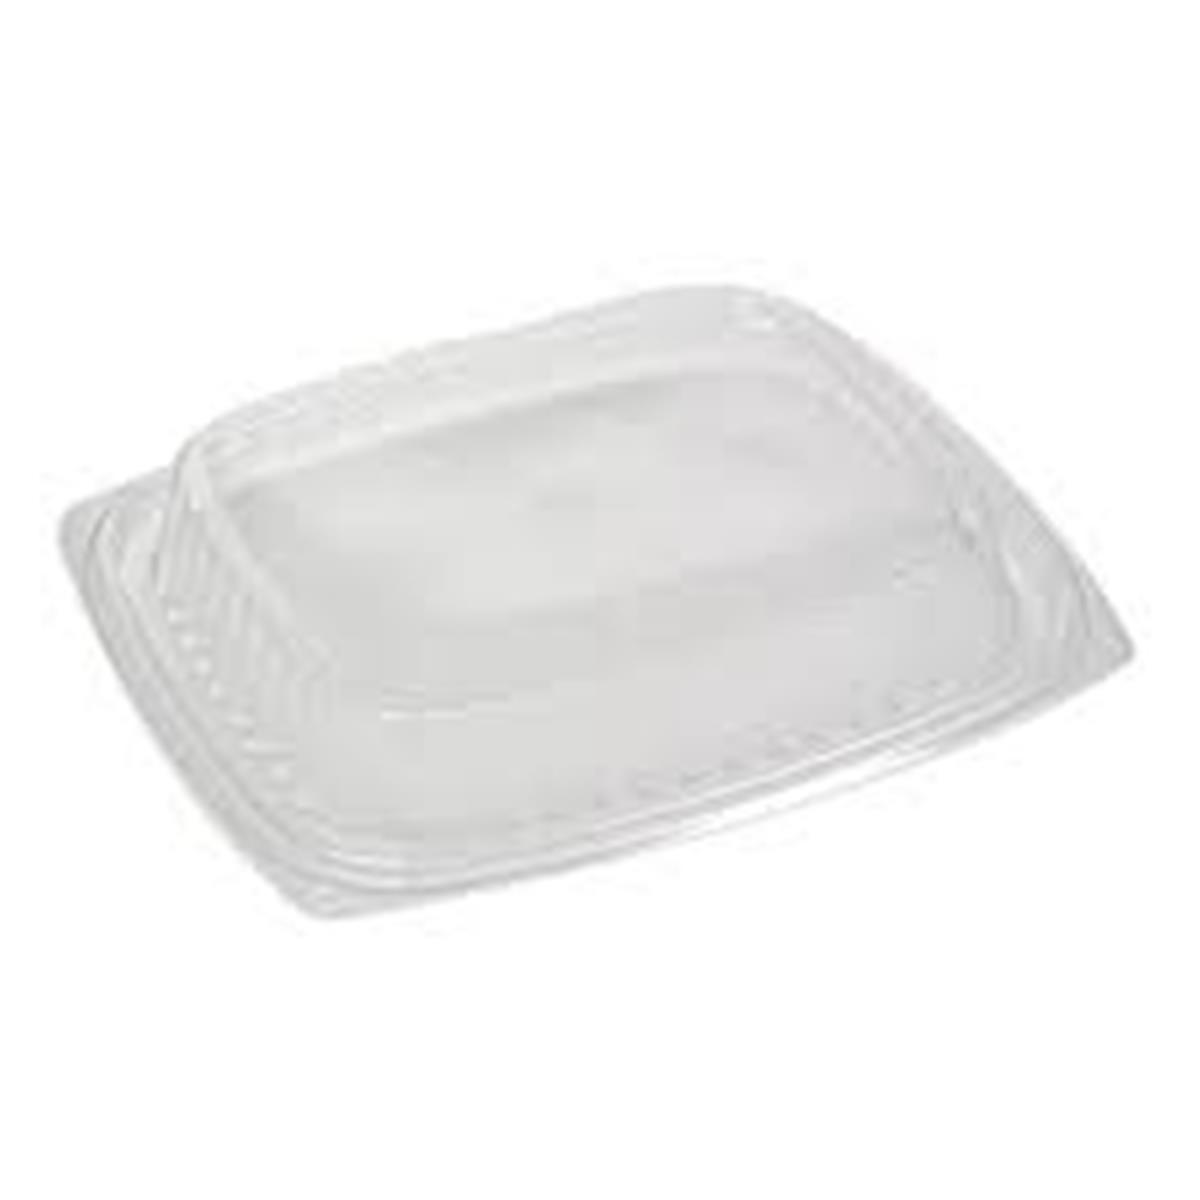 Lnf10 White Lid Plate - Case Of 100